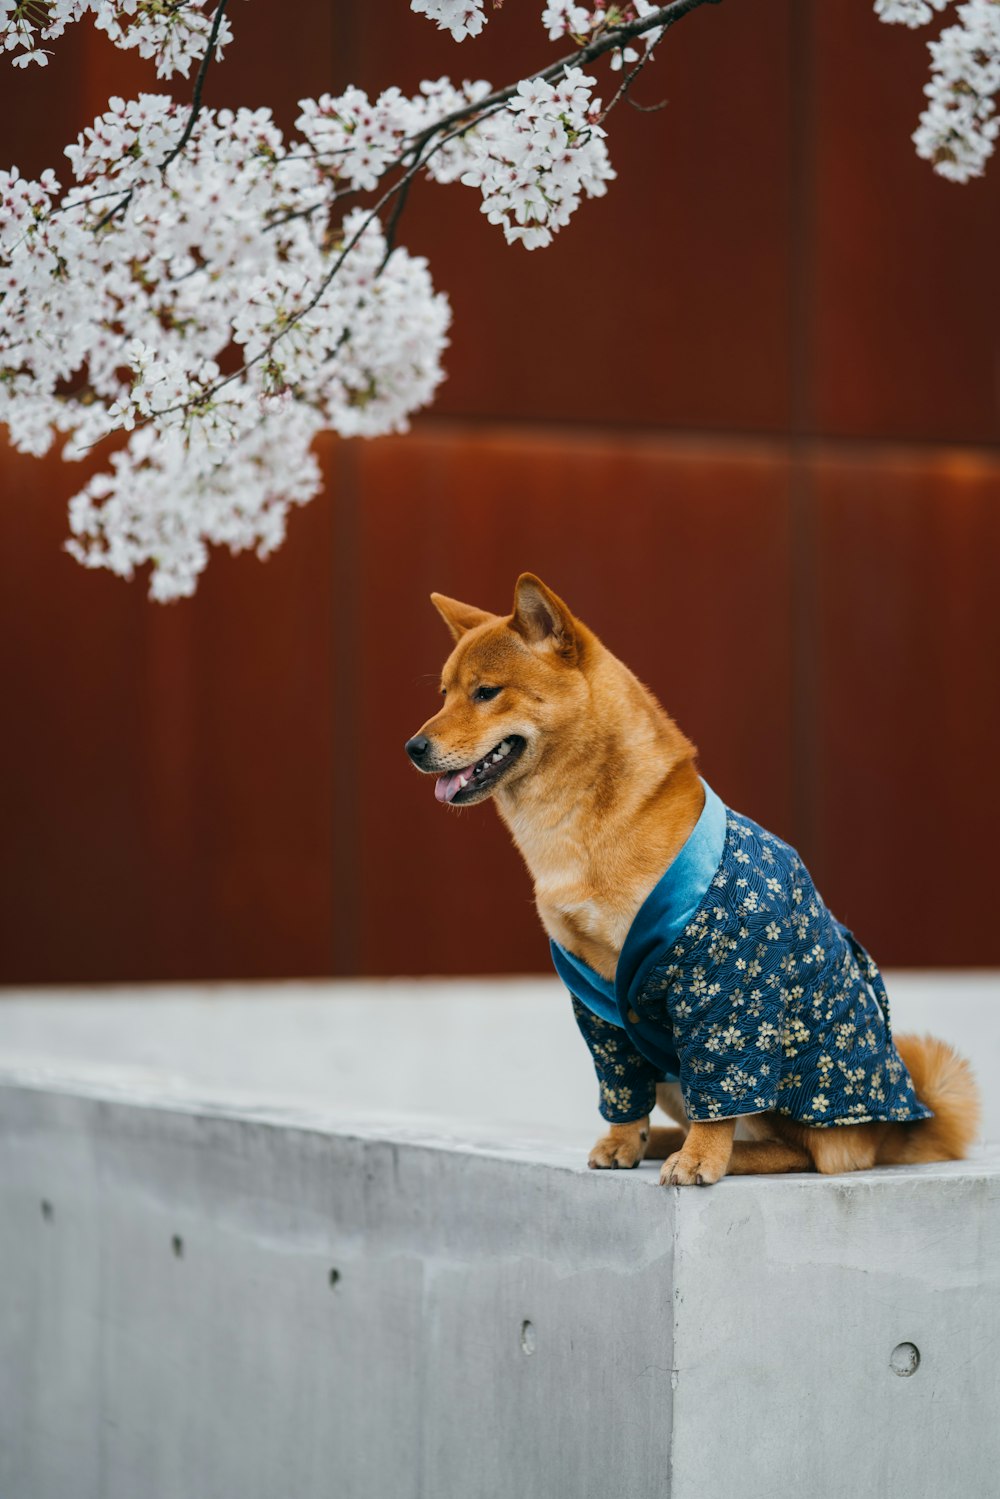 brown short coated dog wearing blue and white floral dress sitting on gray concrete surface